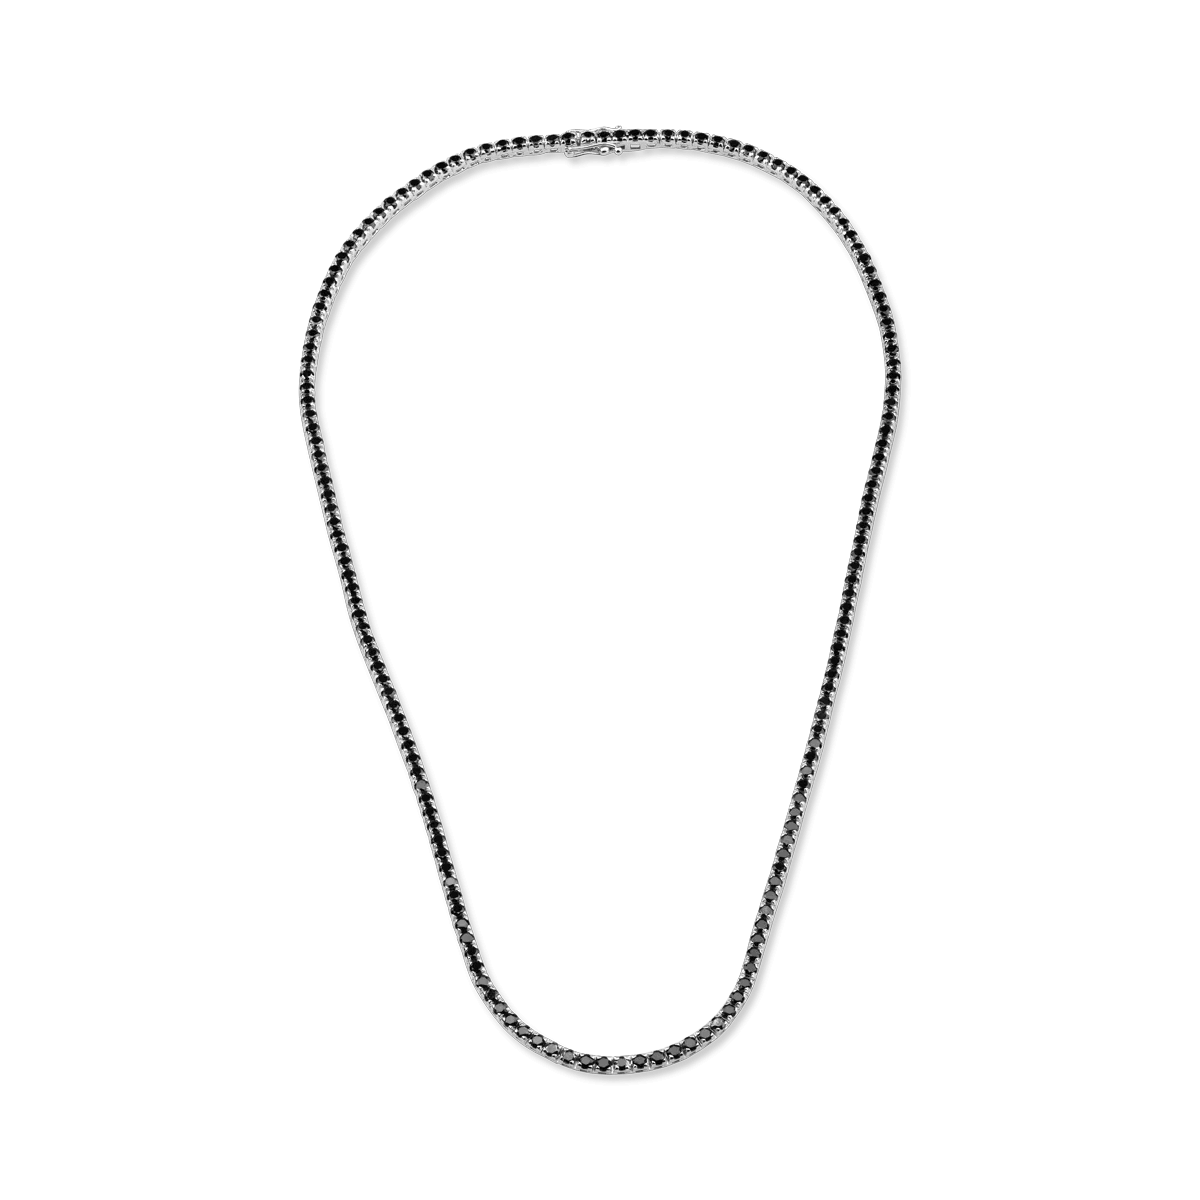 18K white gold tennis necklace with 7.4ct black diamonds